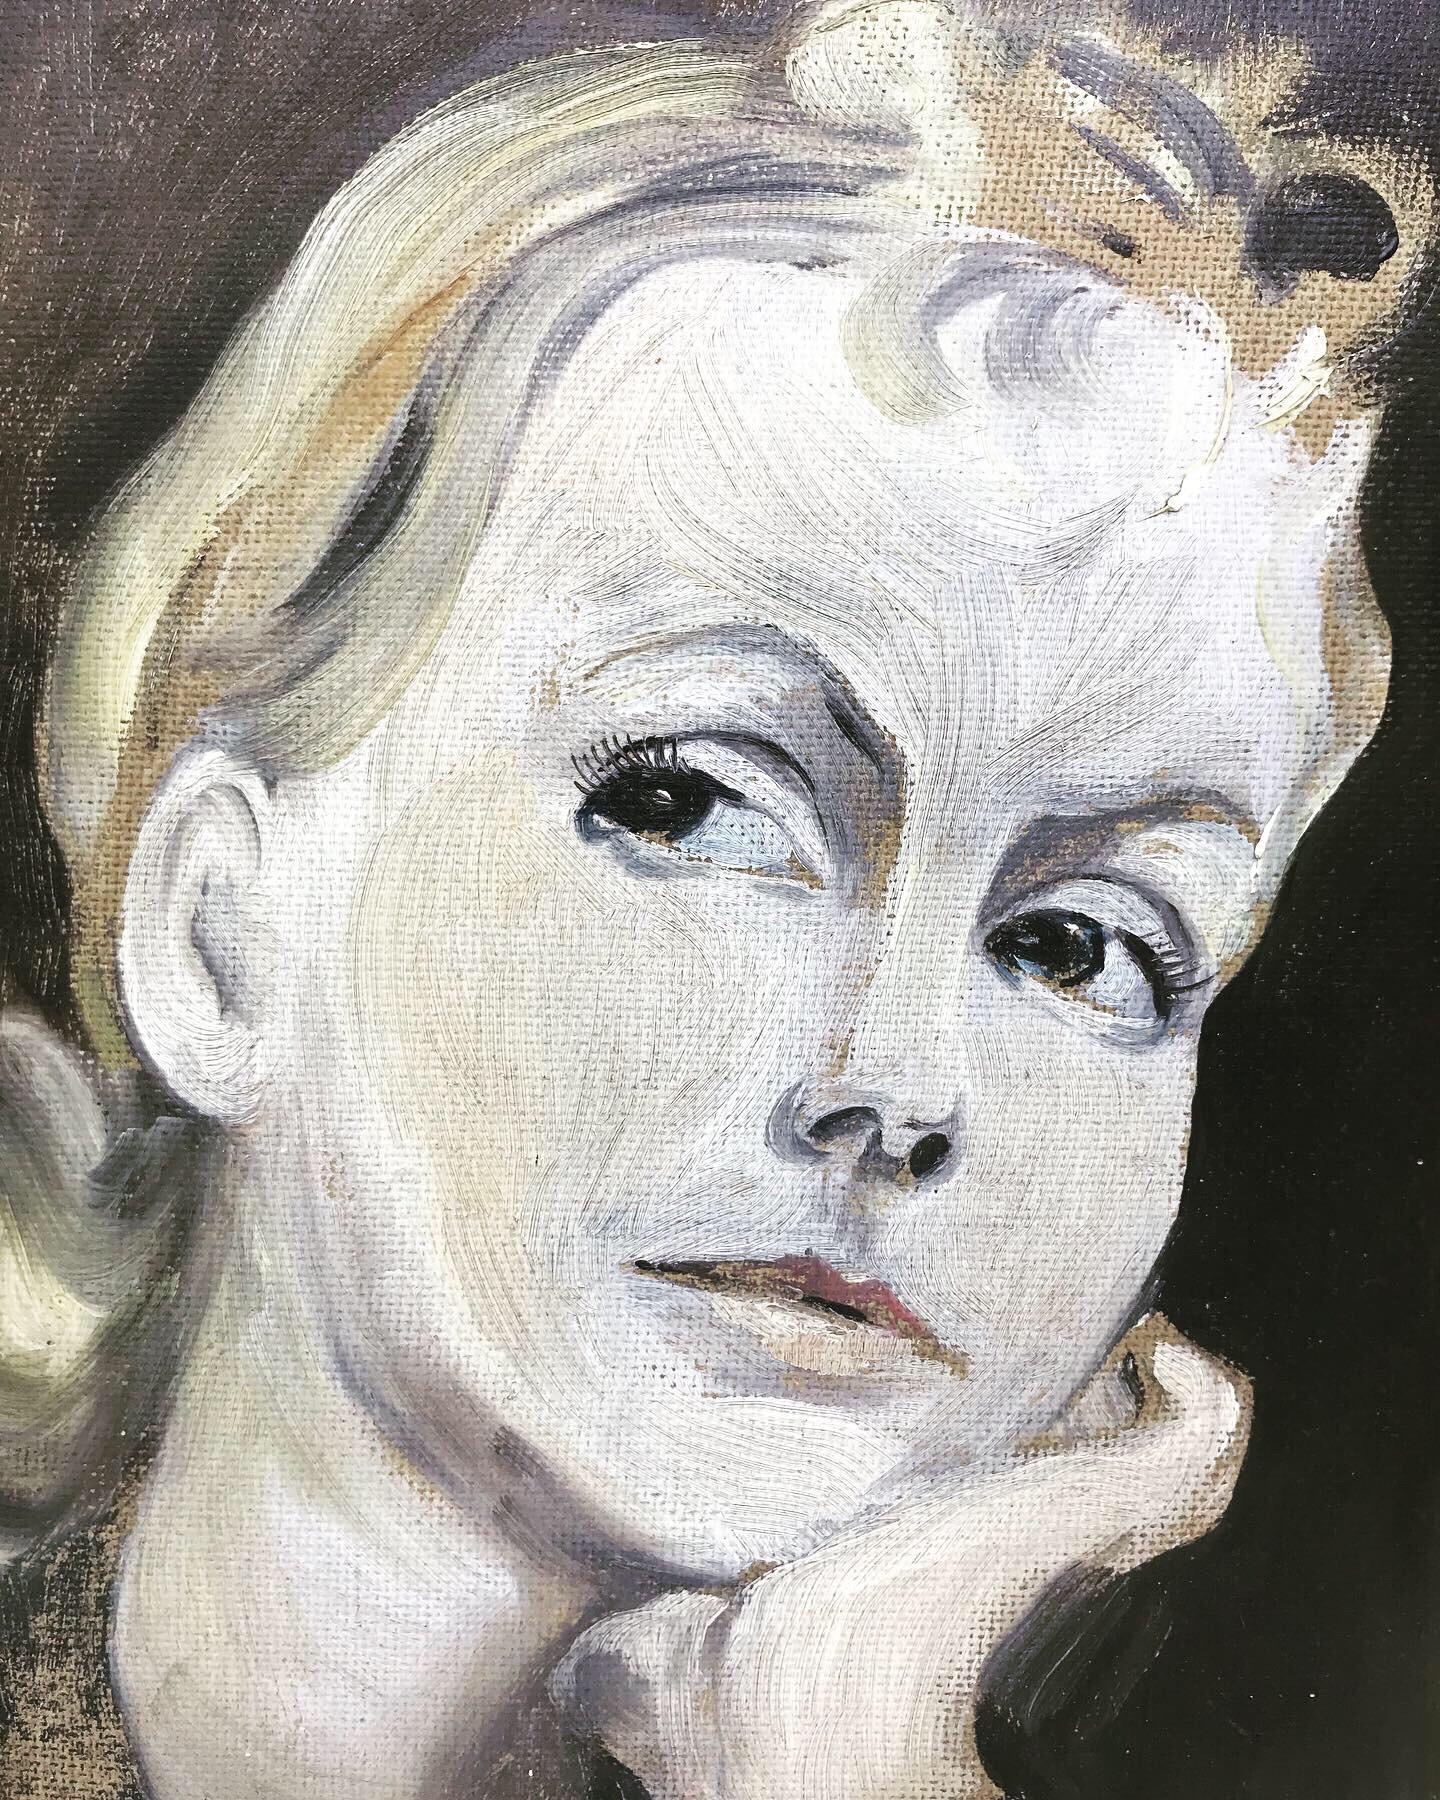 Greta Garbo by an unknown artist signed RO and dated 1931
From the film Kiss in 1929
Oil on board measuring 42 by 32 cm.
Greta Garbo (born Greta Lovisa Gustafsson 18 September 1905 – 15 April 1990) was a Swedish-American film actress during the